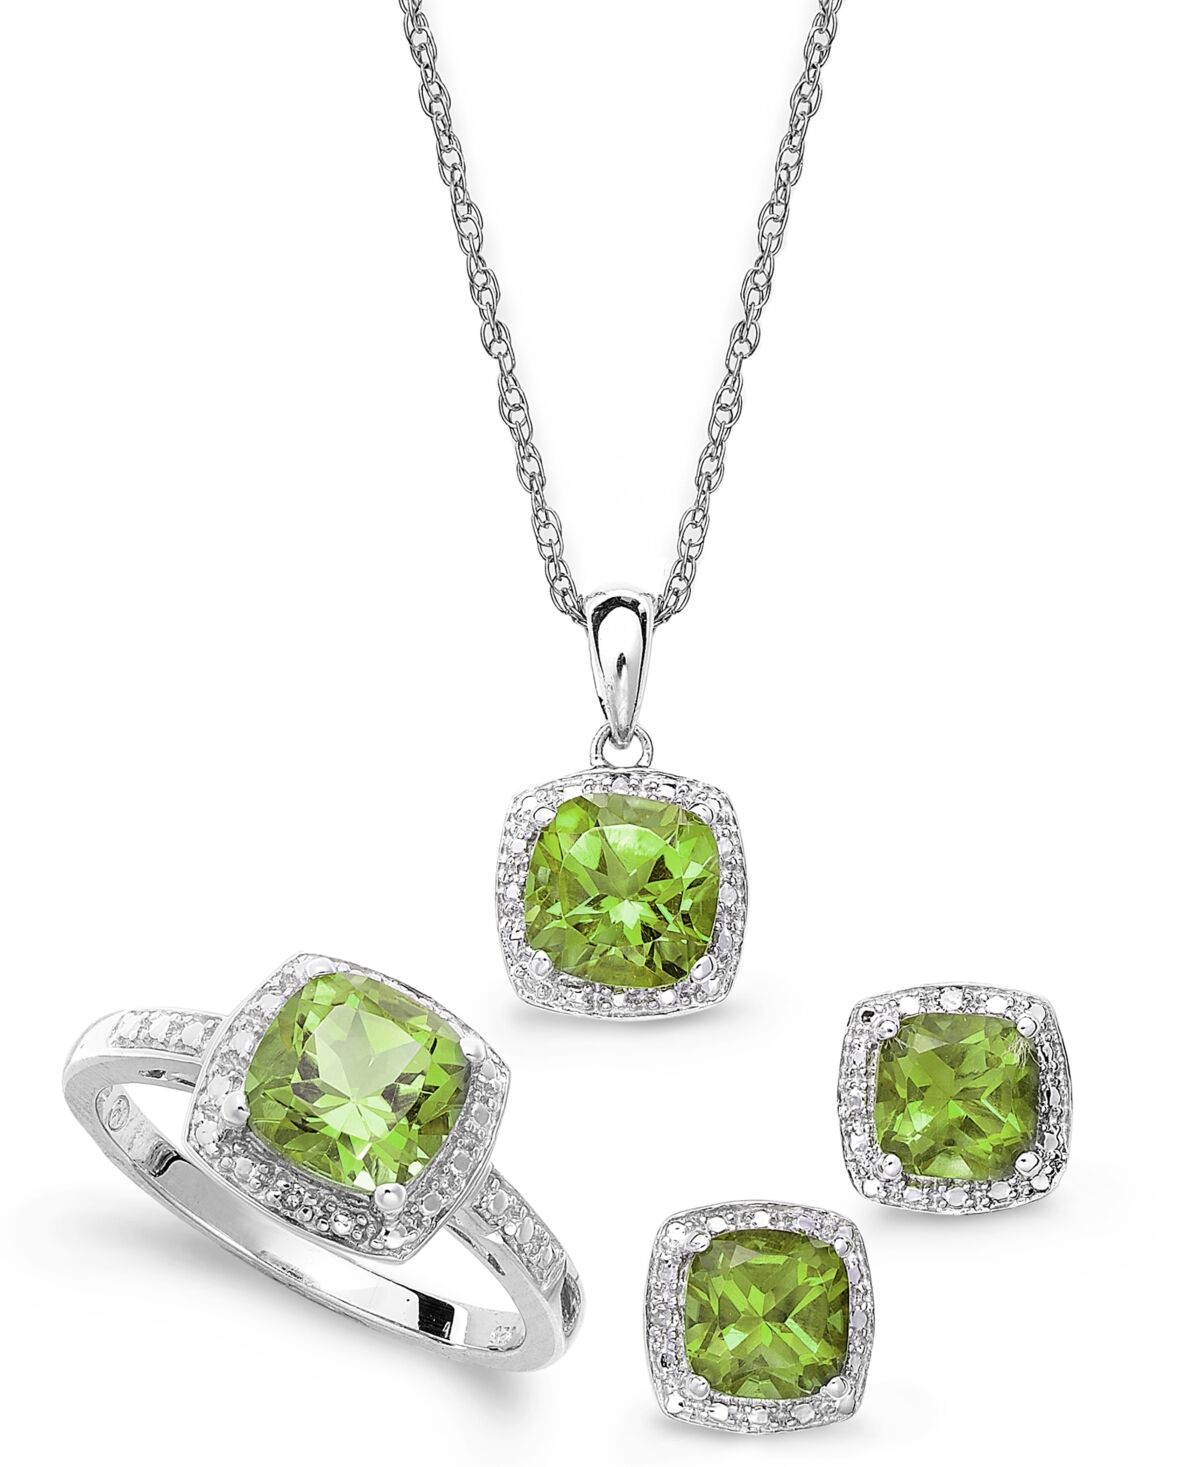 Macy's Sterling Silver Jewelry Set, Peridot (4-3/4 ct. t.w.) and Diamond Accent Necklace, Earrings and Ring Set - Peridot